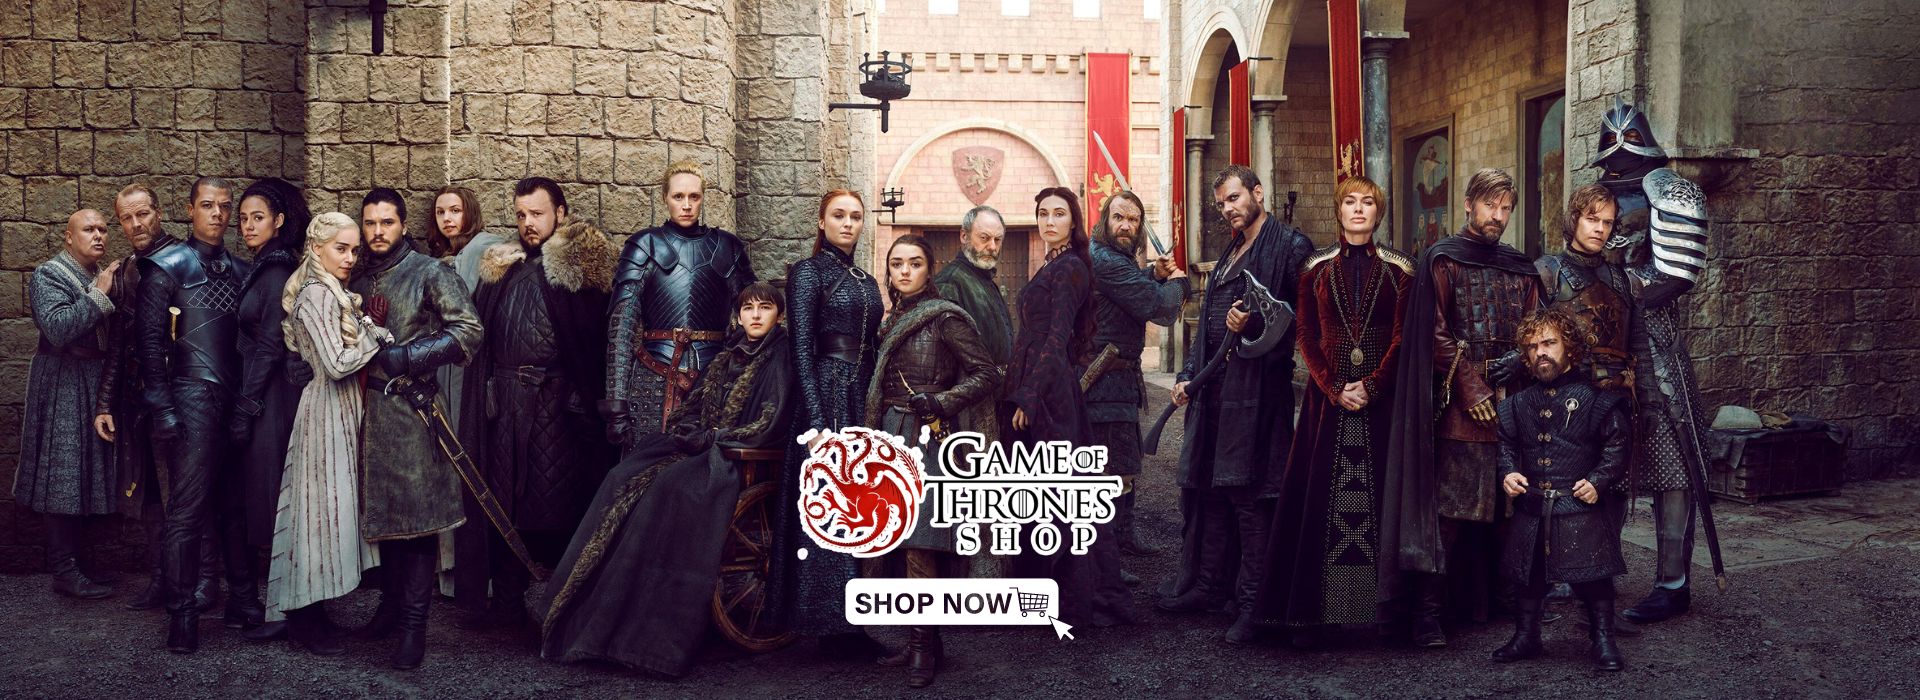 Game Of Thrones Shop Banner